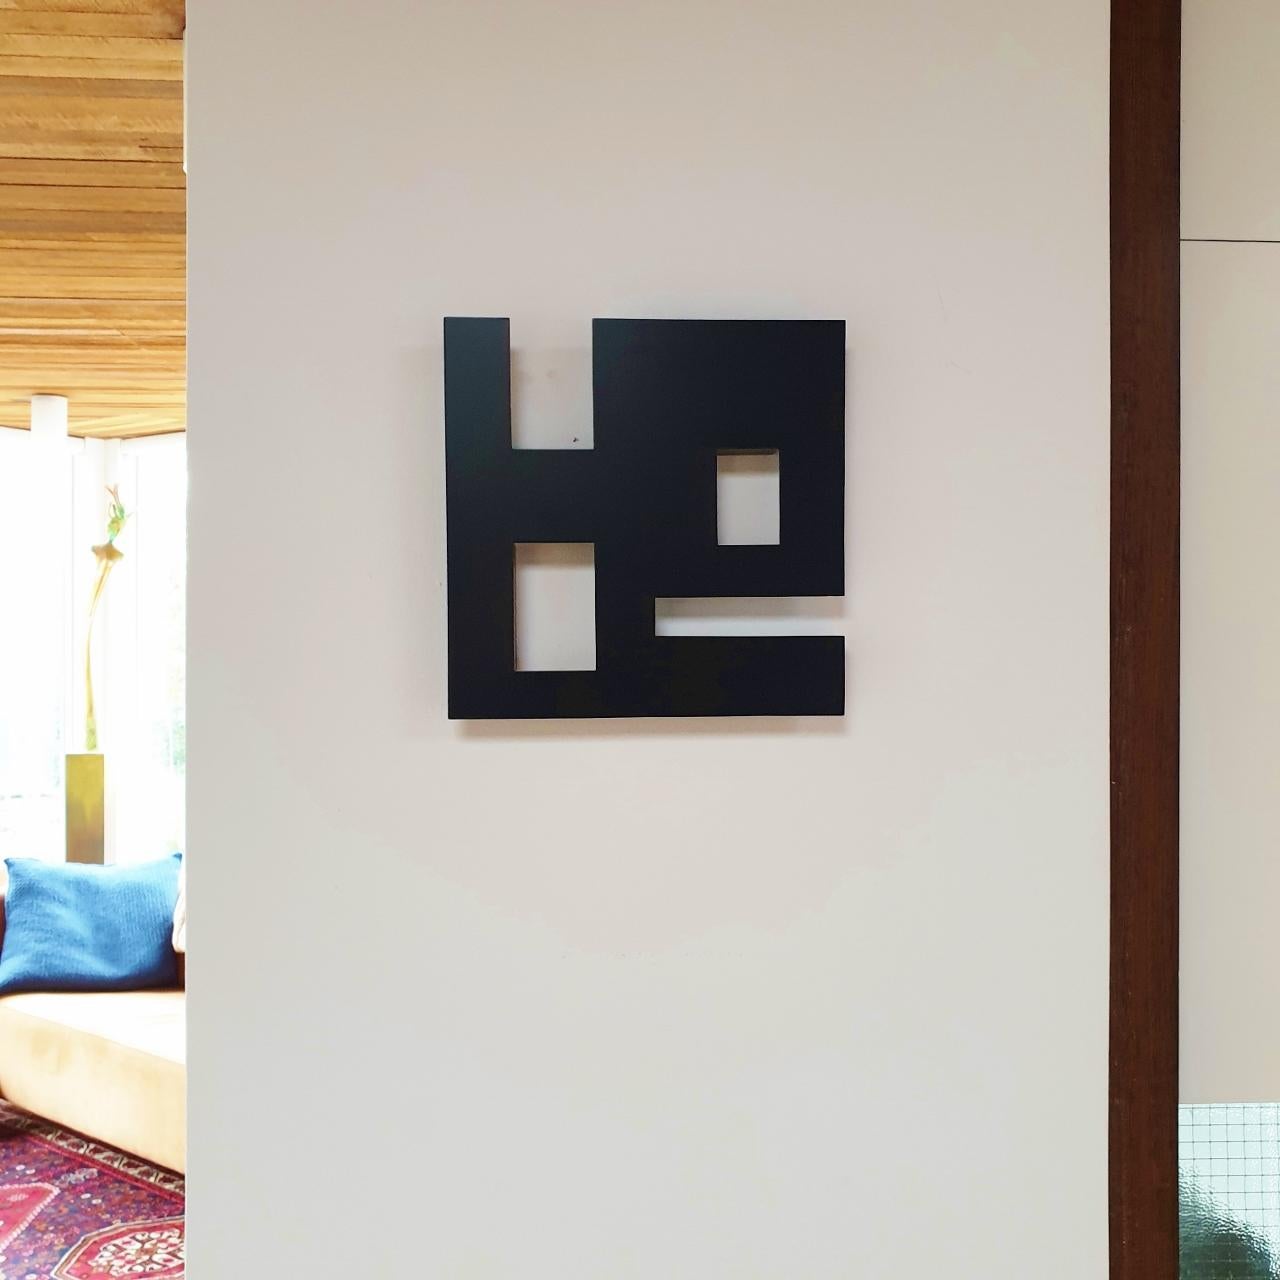 Steel 81 (iv) - contemporary modern geometric sculpture painting relief - Painting by Carl Möller